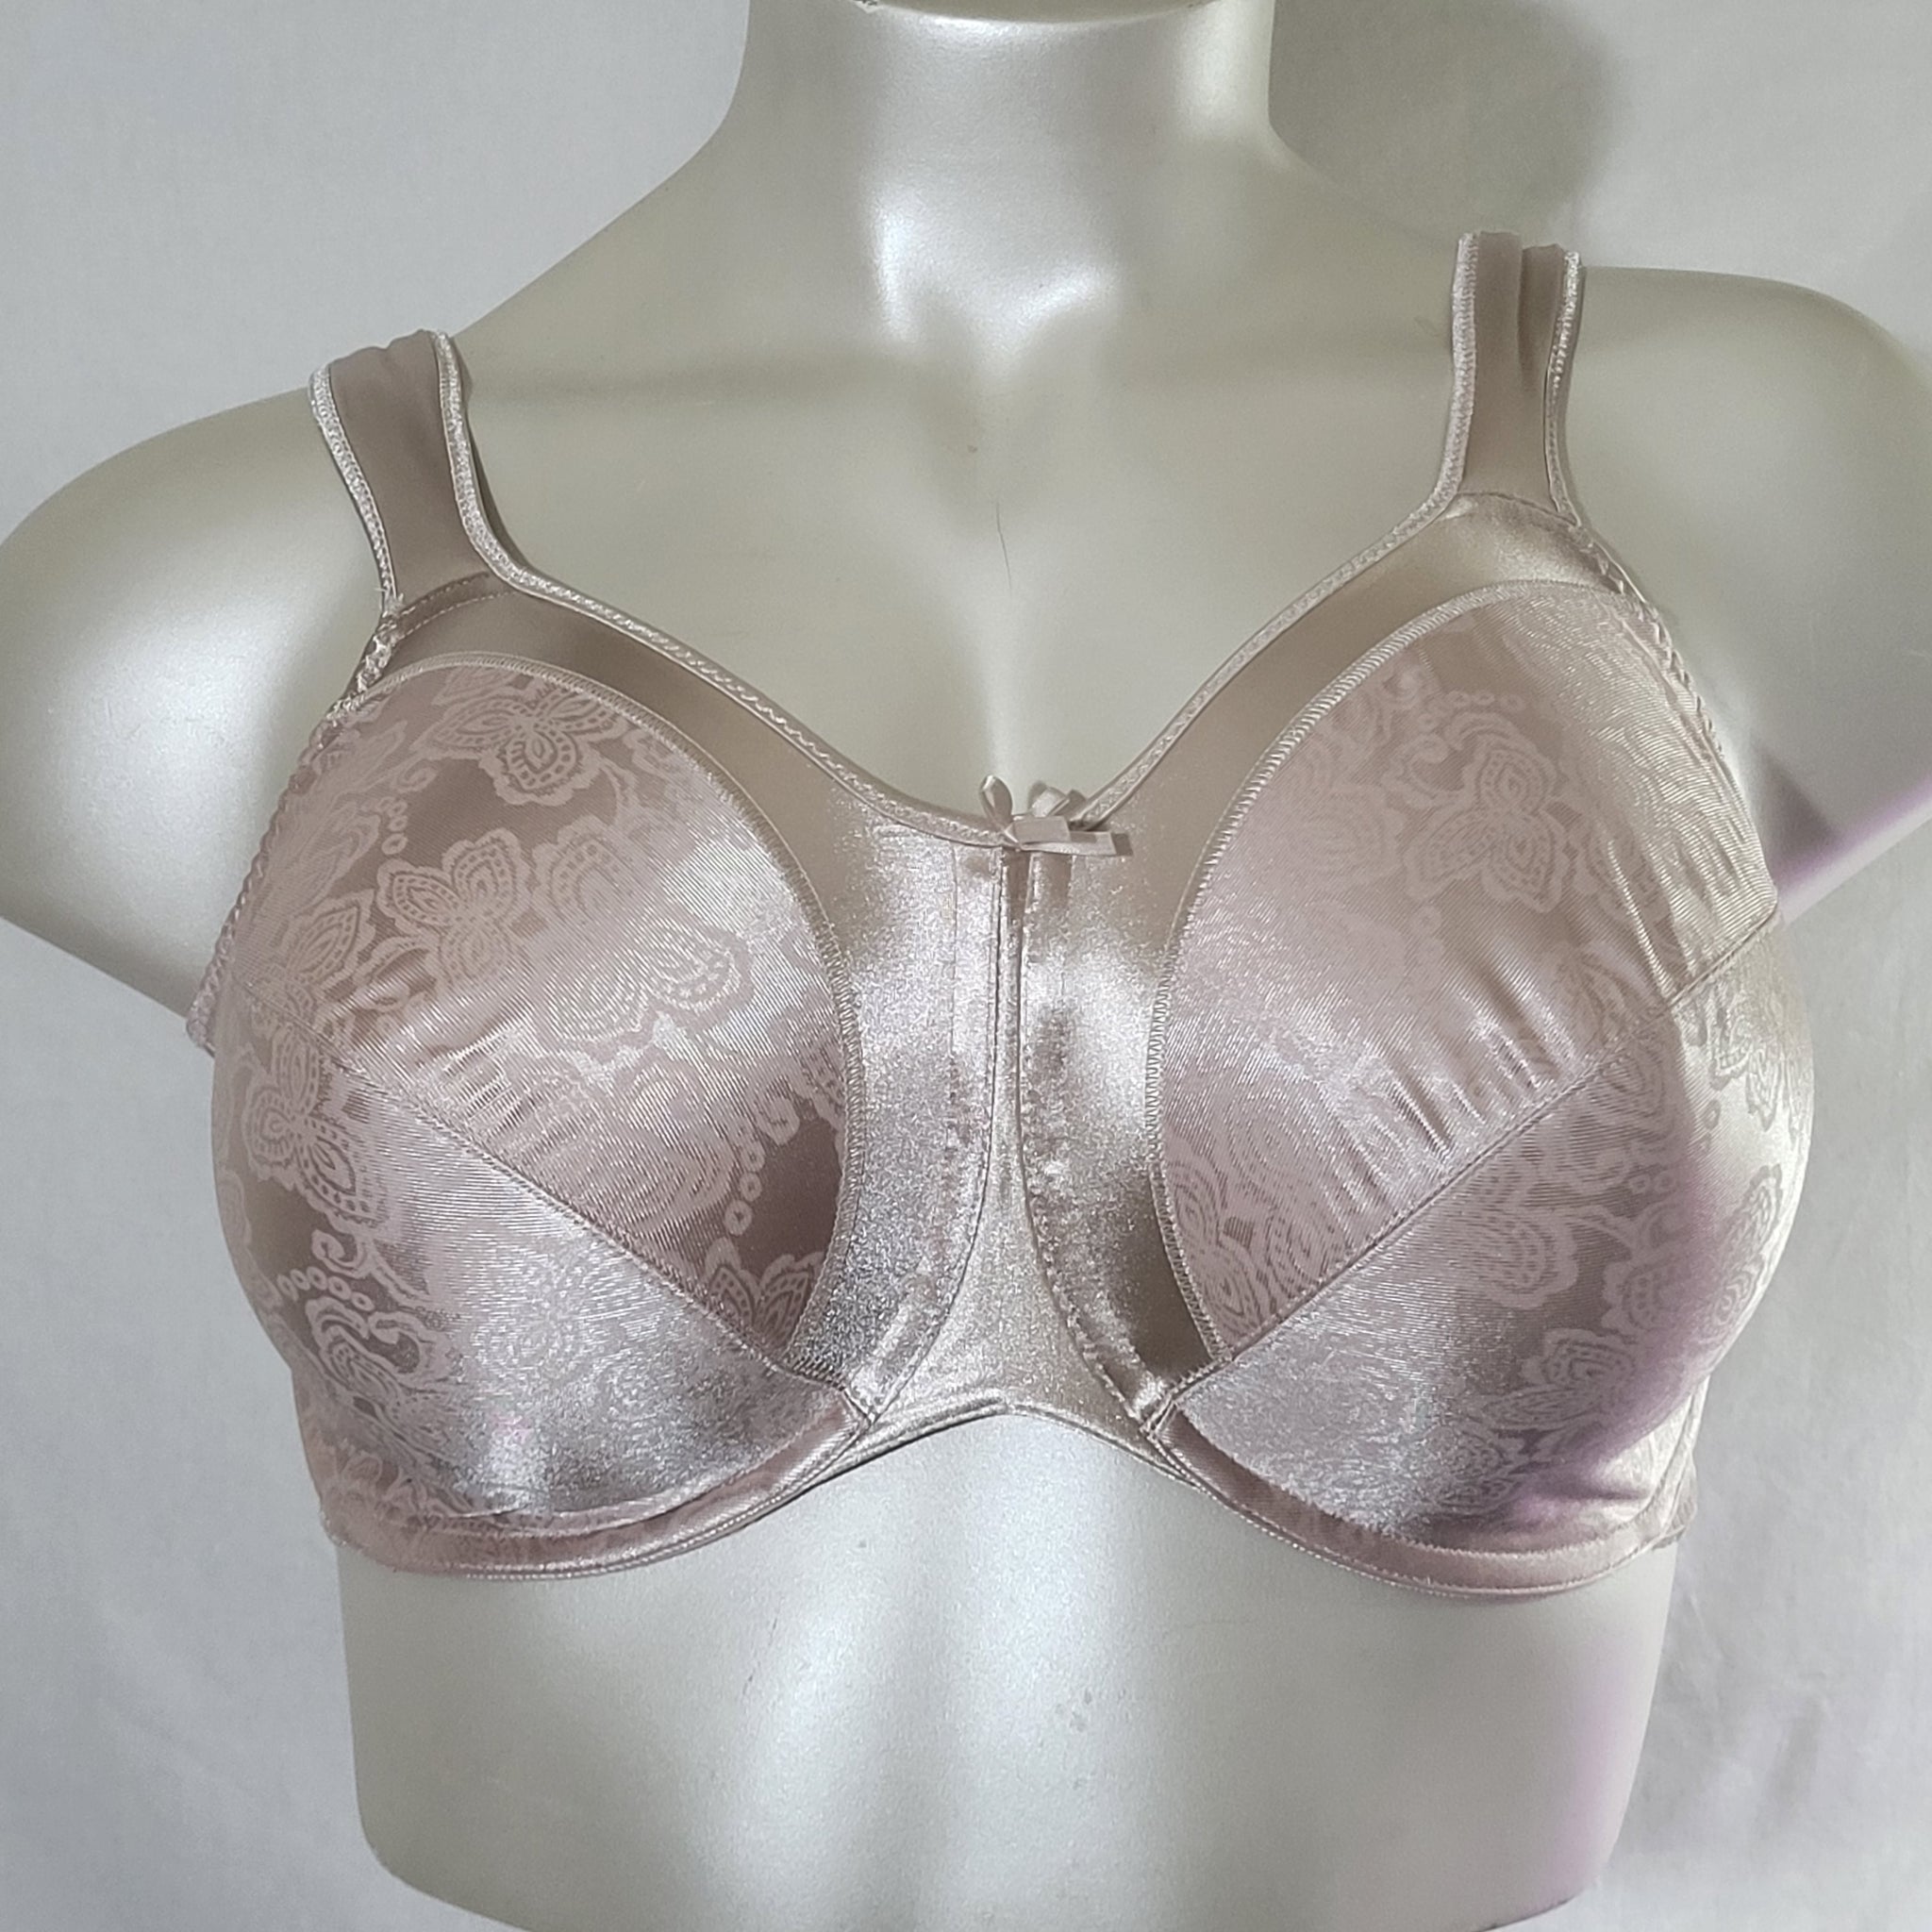 Bali 3562 Satin Tracings Underwire Bra 36D Nude NEW WITH